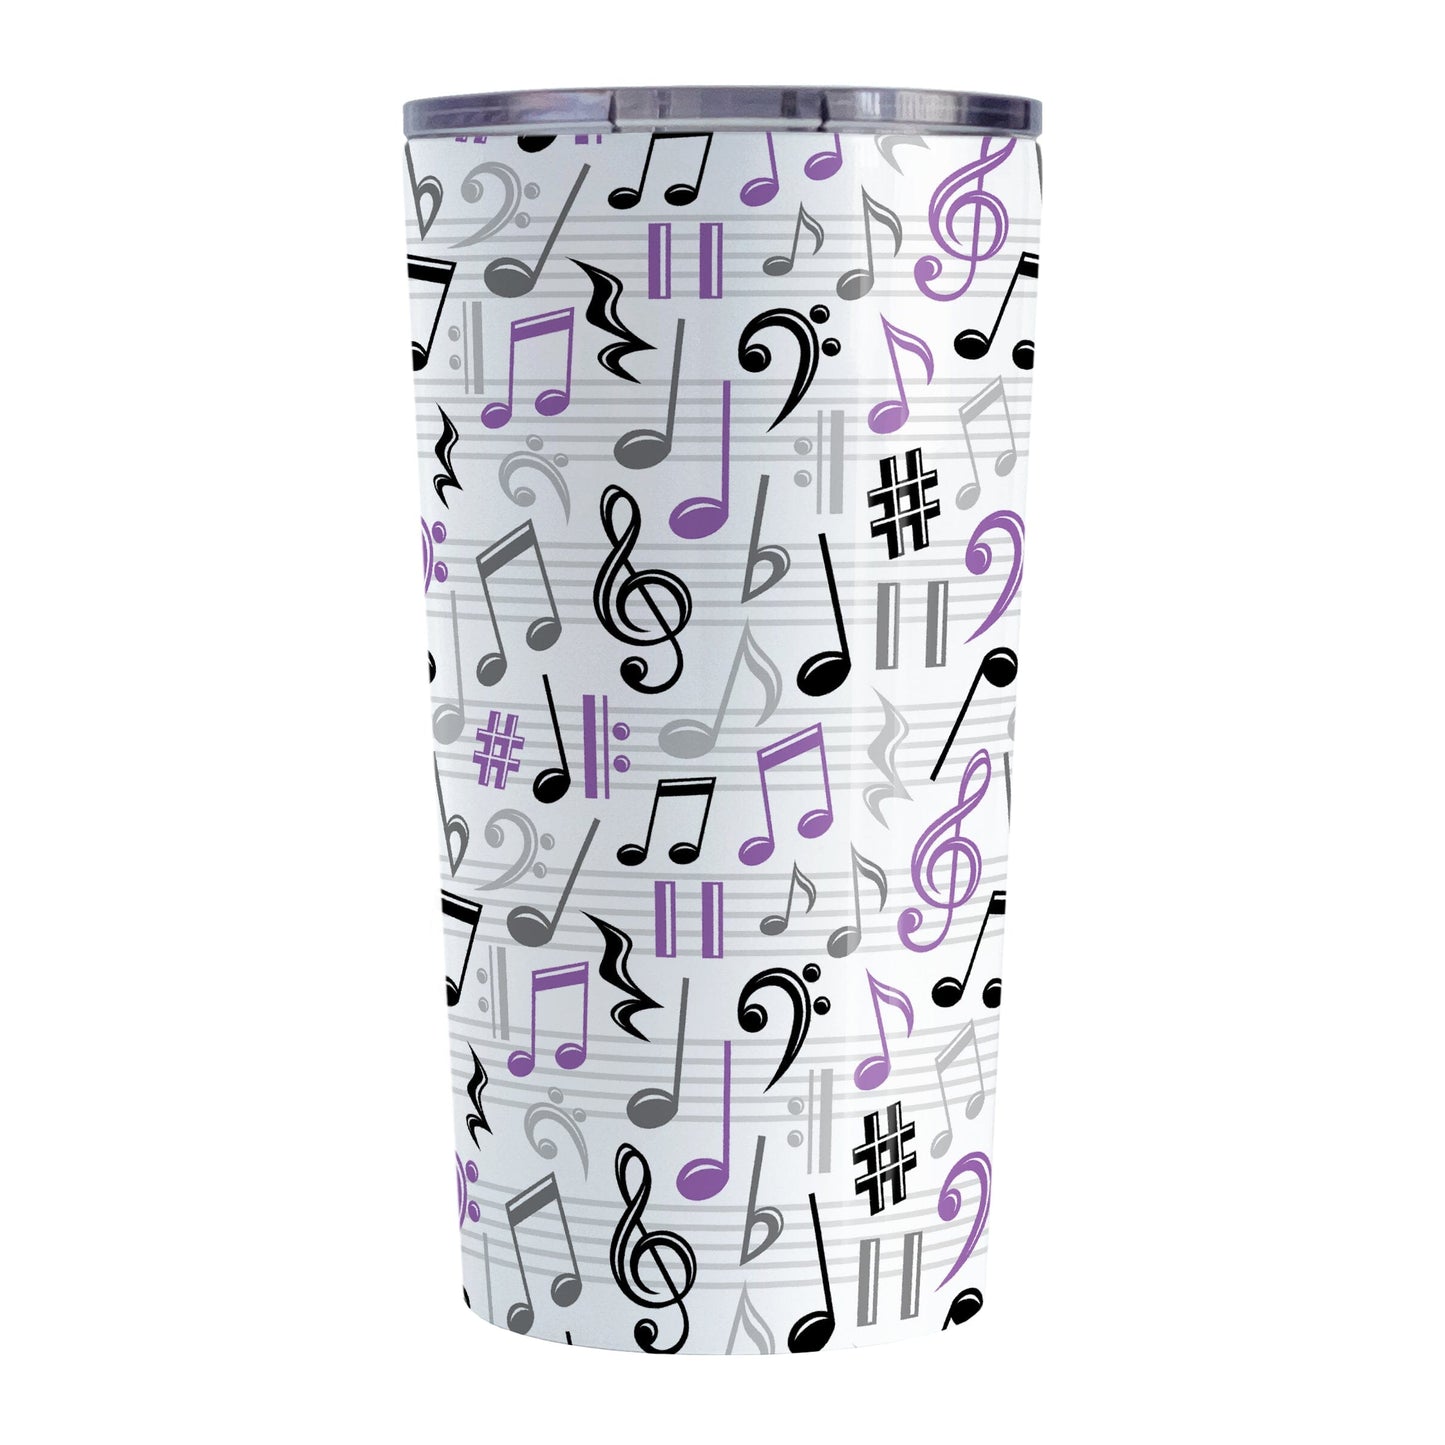 Purple Music Notes Pattern Tumbler Cup (20oz) at Amy's Coffee Mugs. A stainless steel tumbler cup designed with music notes and symbols in purple, black, and gray in a pattern that wraps around the cup.